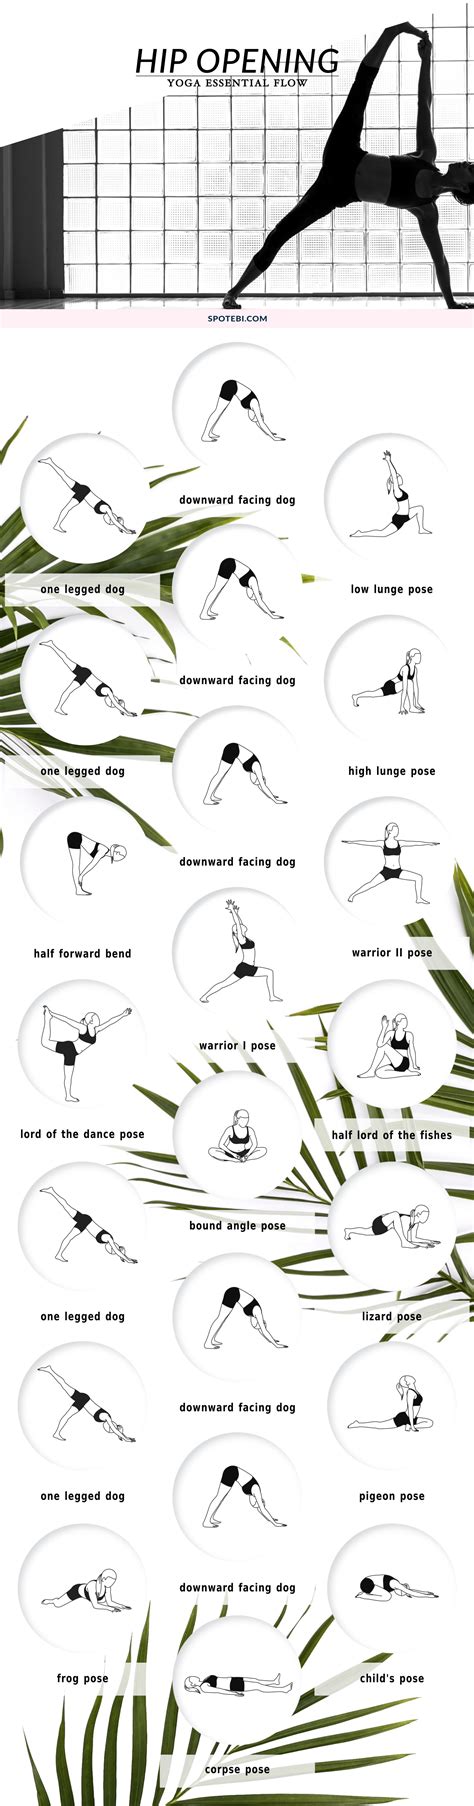 Hip Opening Sequence Yoga Essential Flow